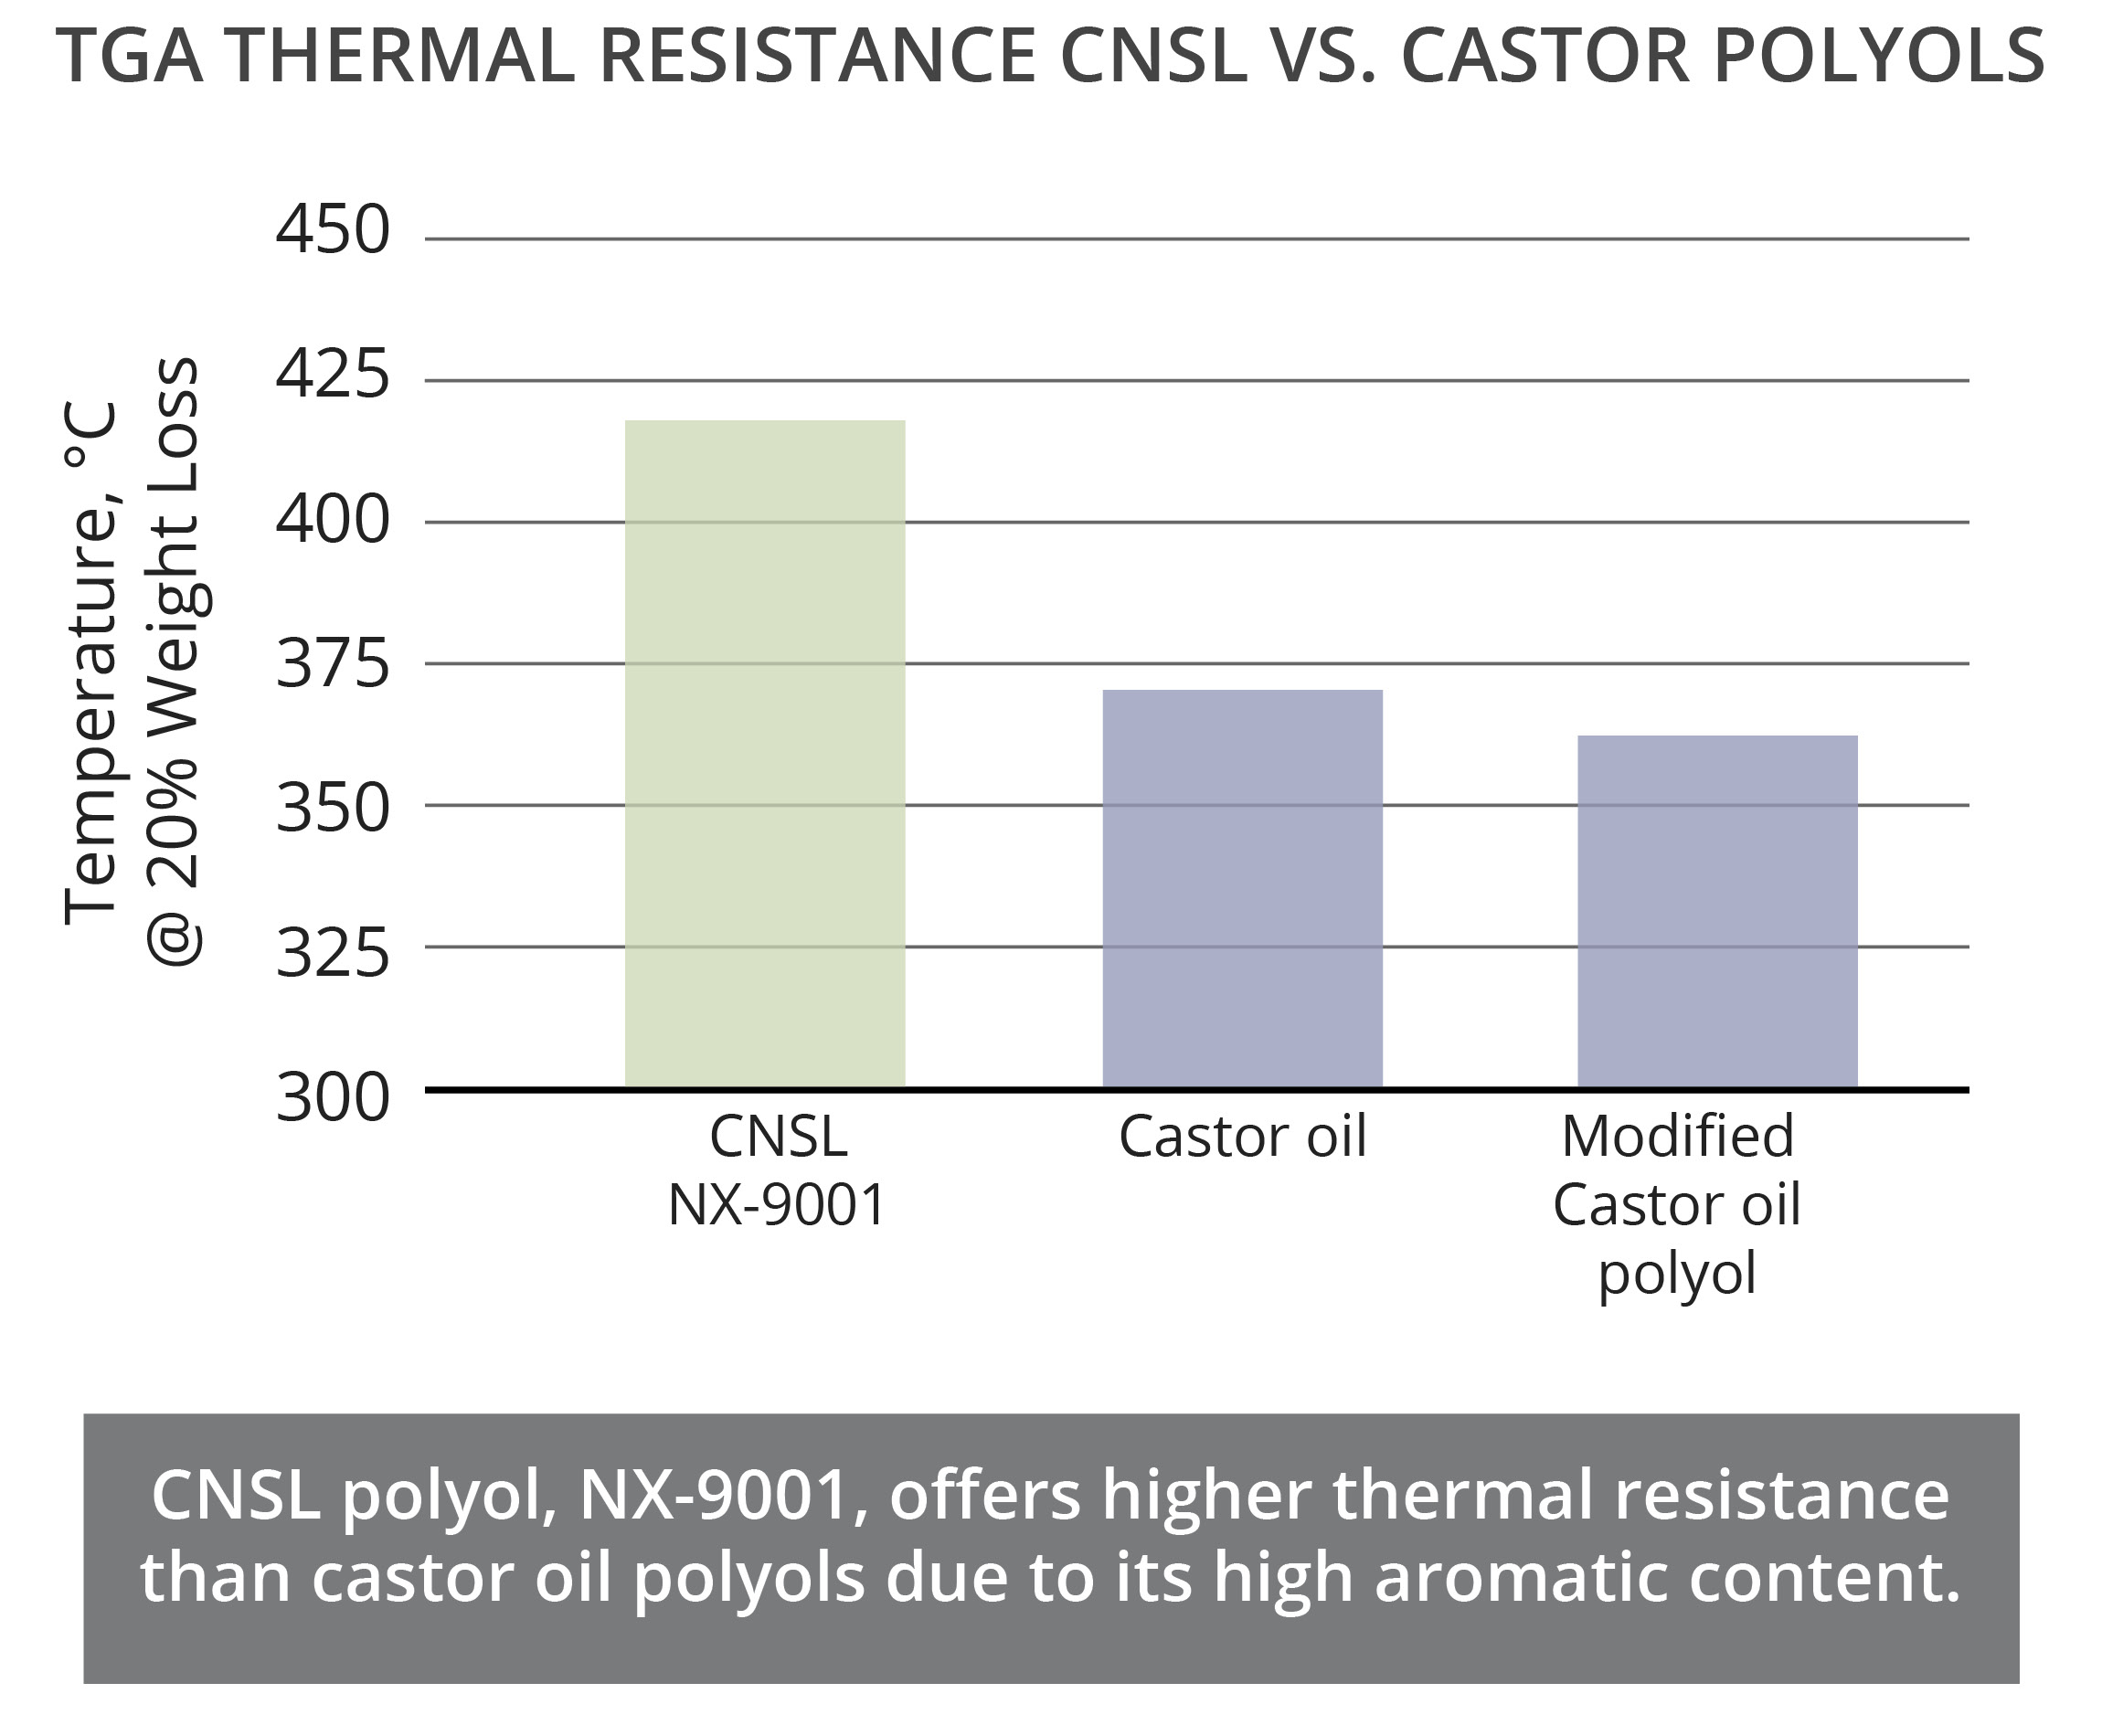 CNSL polyols are high in aromaticity and provide higher heat resistance as a result